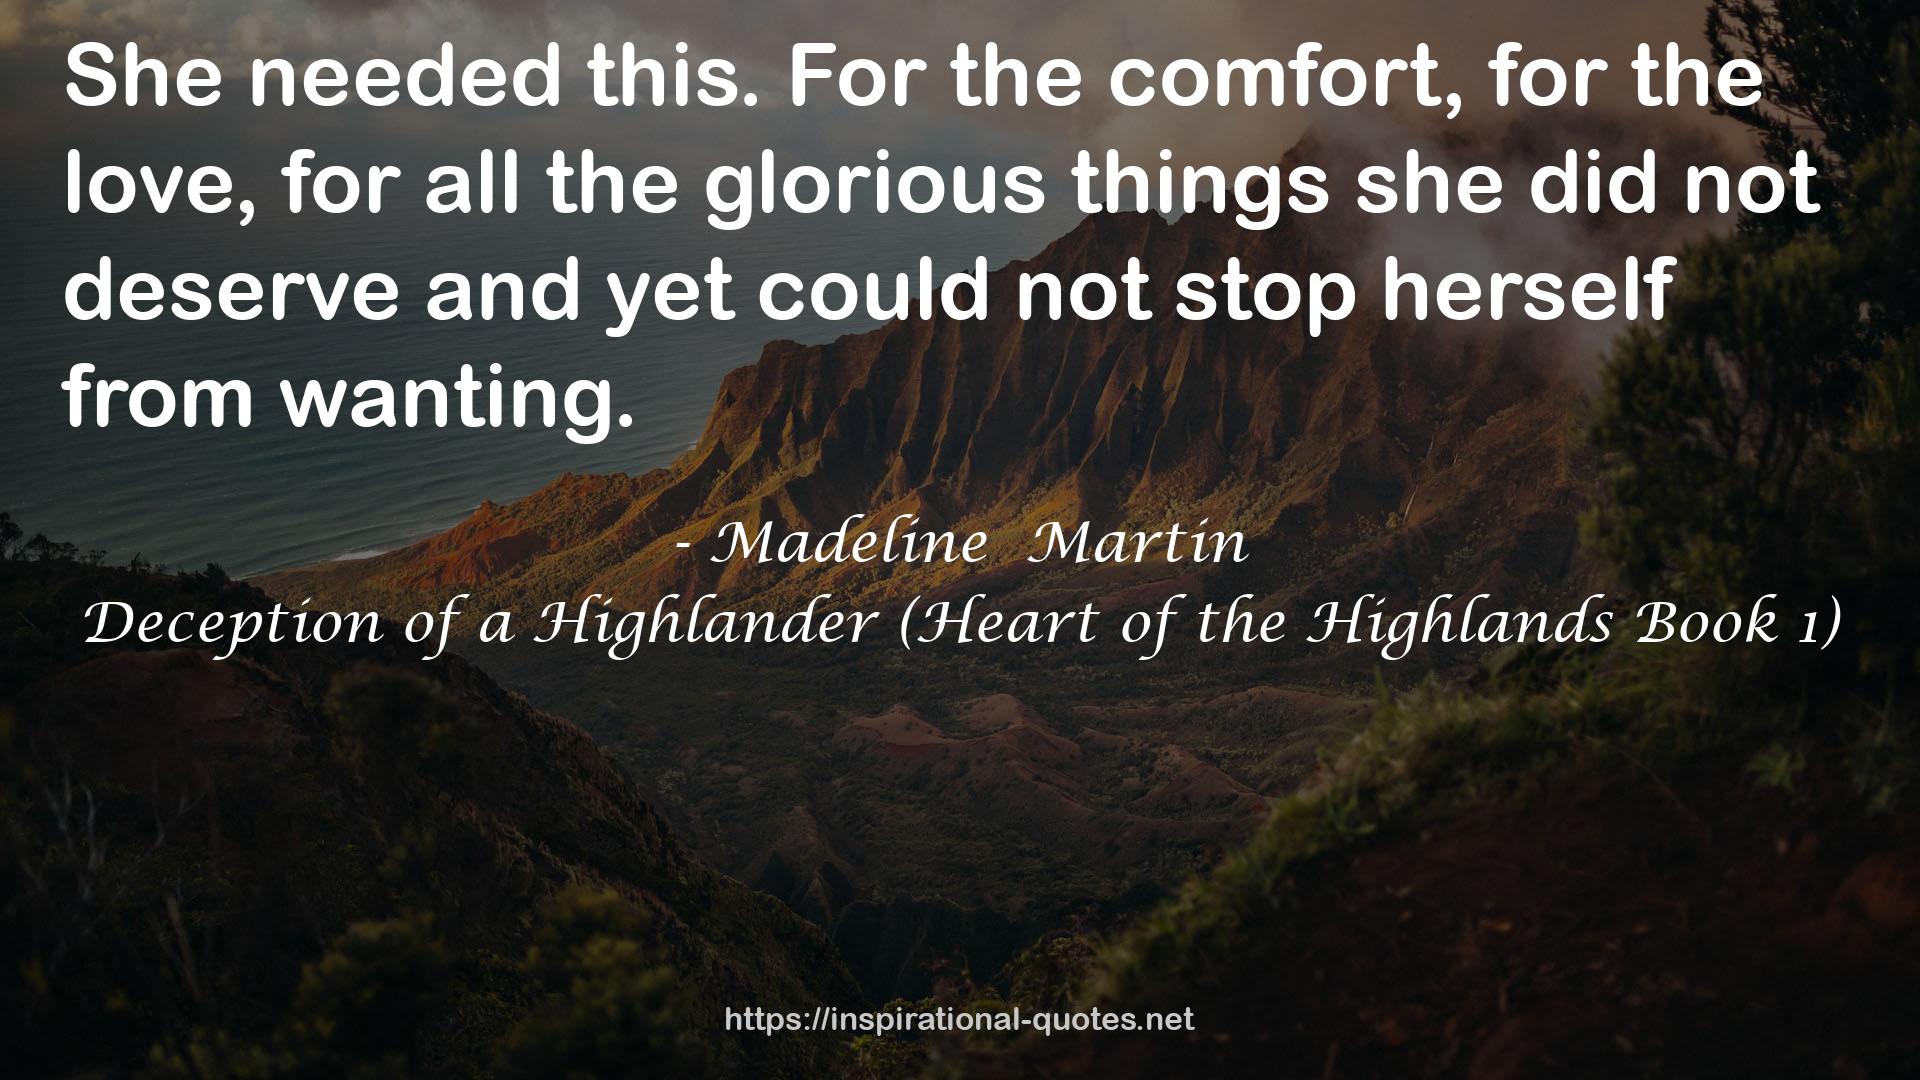 Deception of a Highlander (Heart of the Highlands Book 1) QUOTES